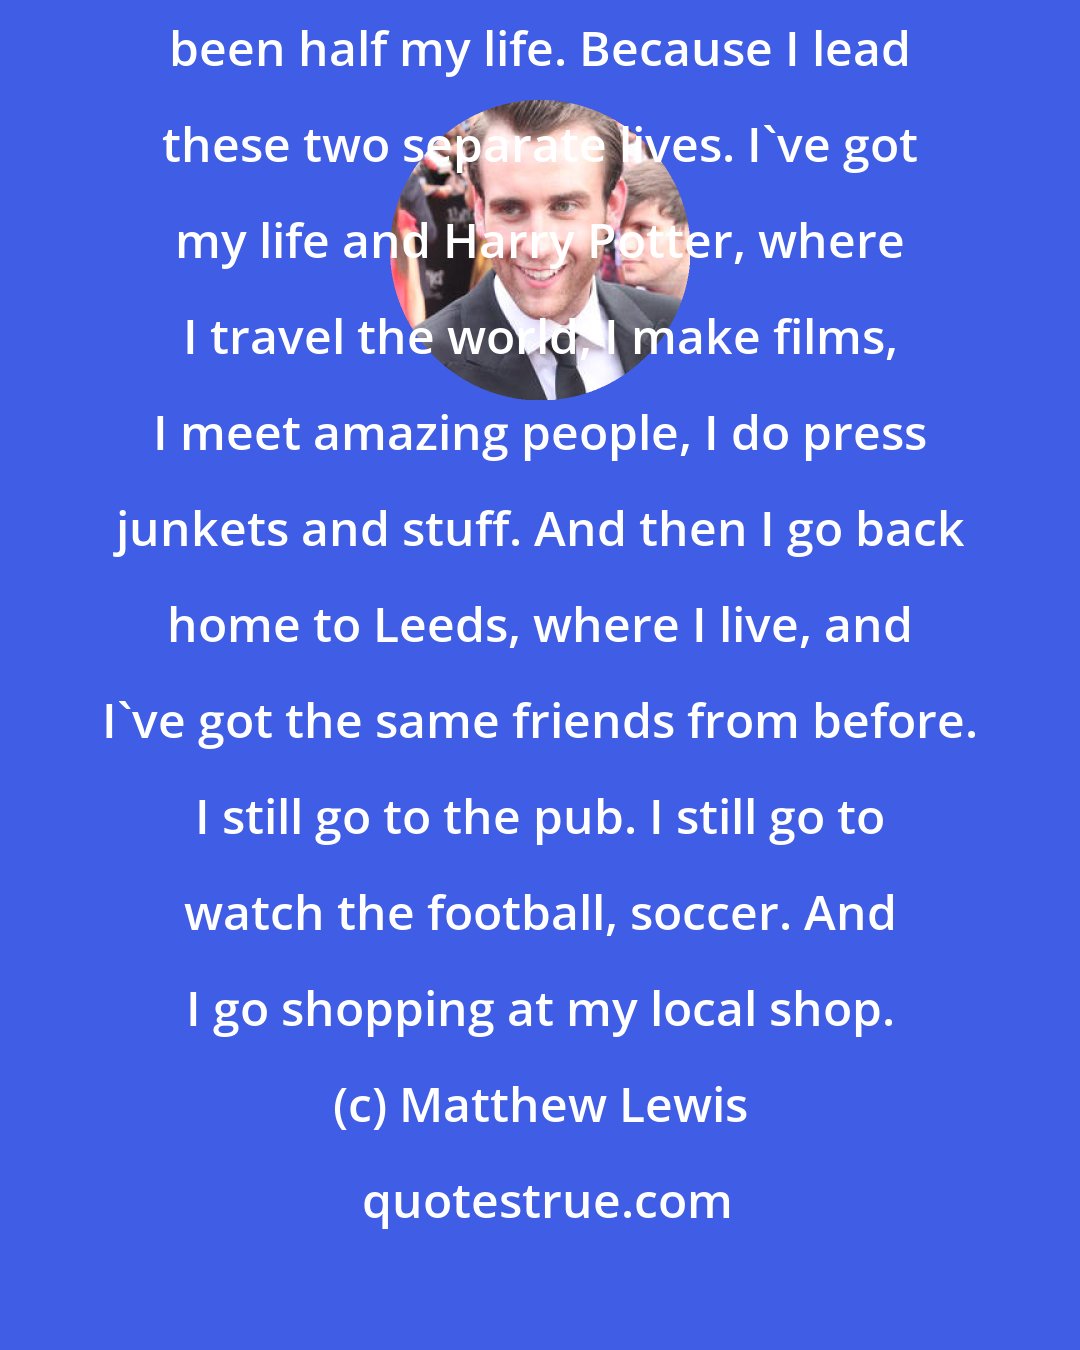 Matthew Lewis: I never really looked at it like that, but it's true. It's weird that it's been half my life. Because I lead these two separate lives. I've got my life and Harry Potter, where I travel the world, I make films, I meet amazing people, I do press junkets and stuff. And then I go back home to Leeds, where I live, and I've got the same friends from before. I still go to the pub. I still go to watch the football, soccer. And I go shopping at my local shop.